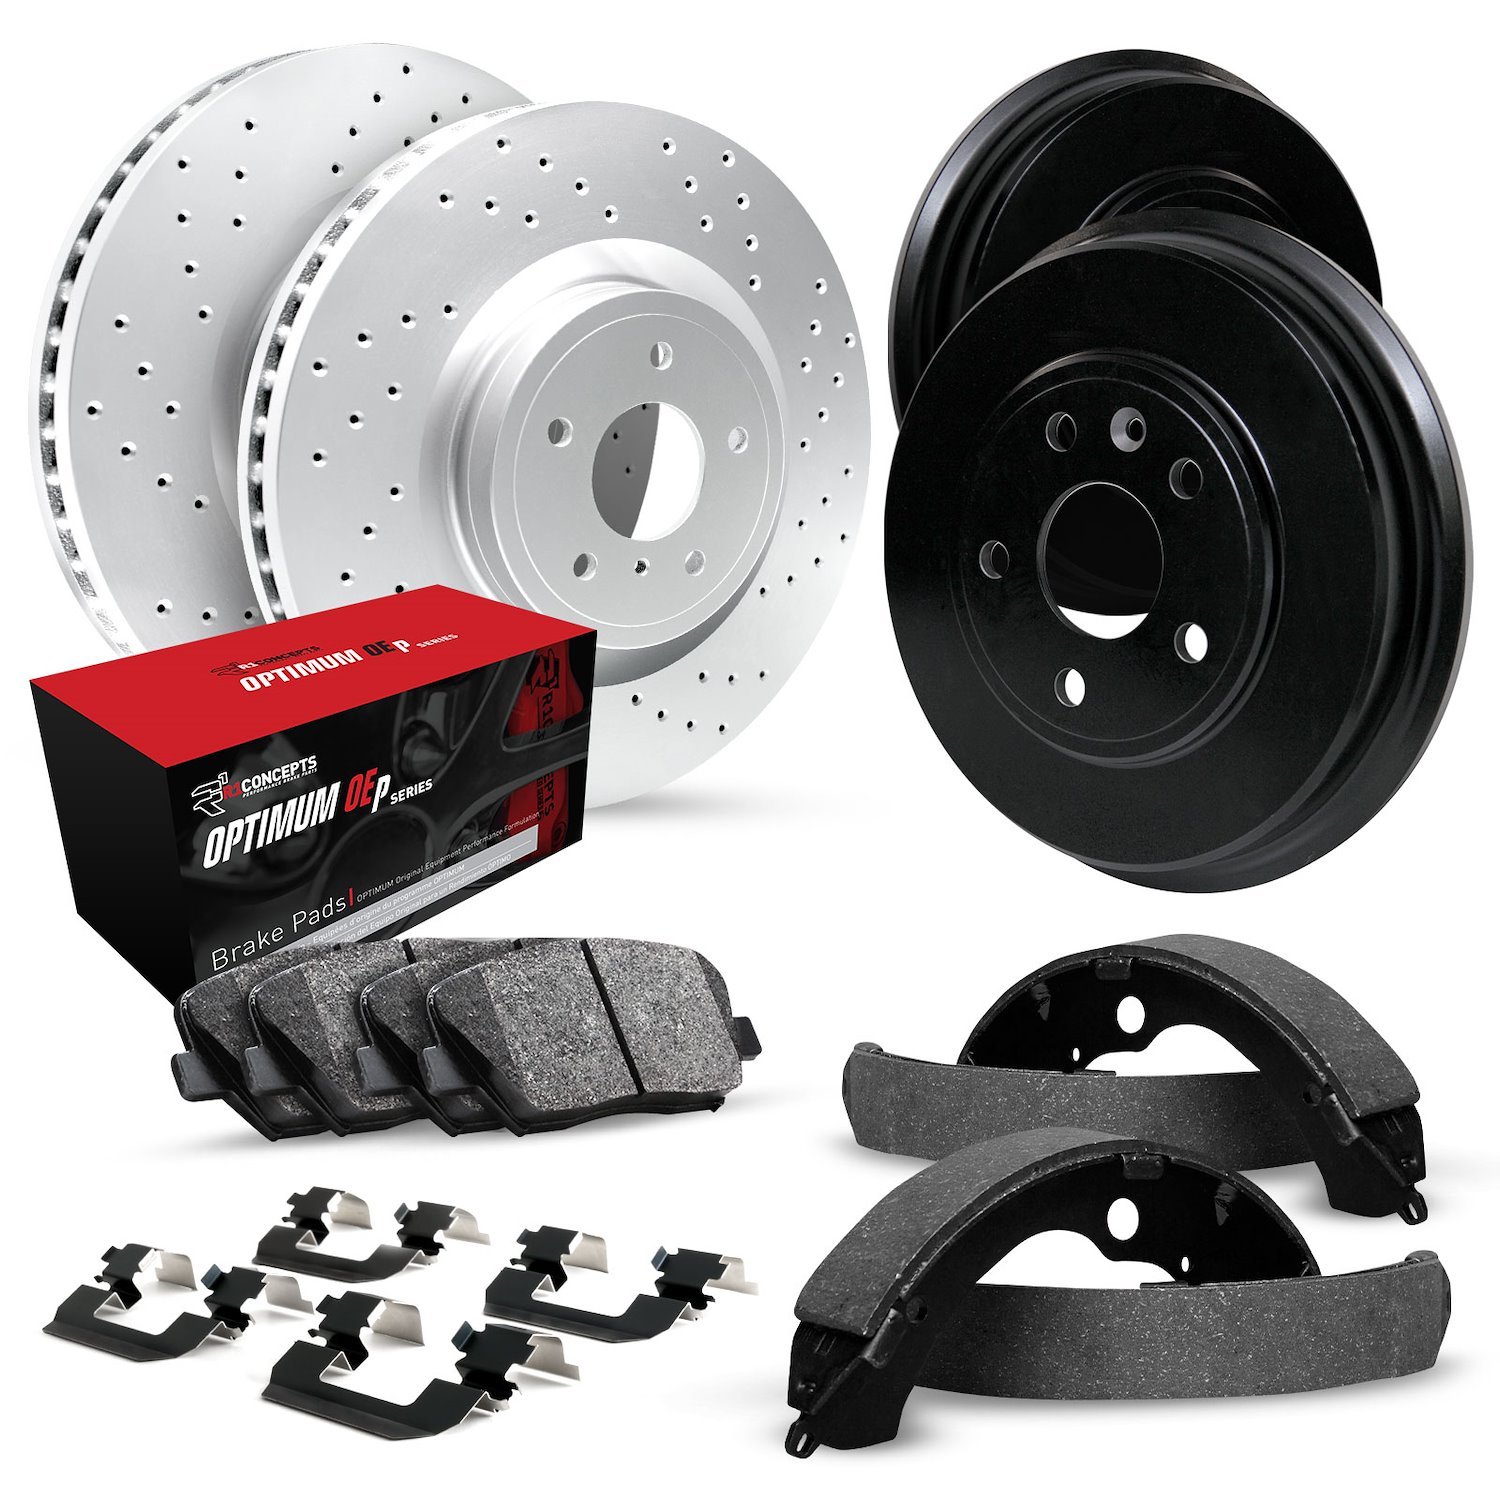 GEO-Carbon Drilled Brake Rotor & Drum Set w/Optimum OE Pads, Shoes, & Hardware, 1994-1996 GM, Position: Front & Rear